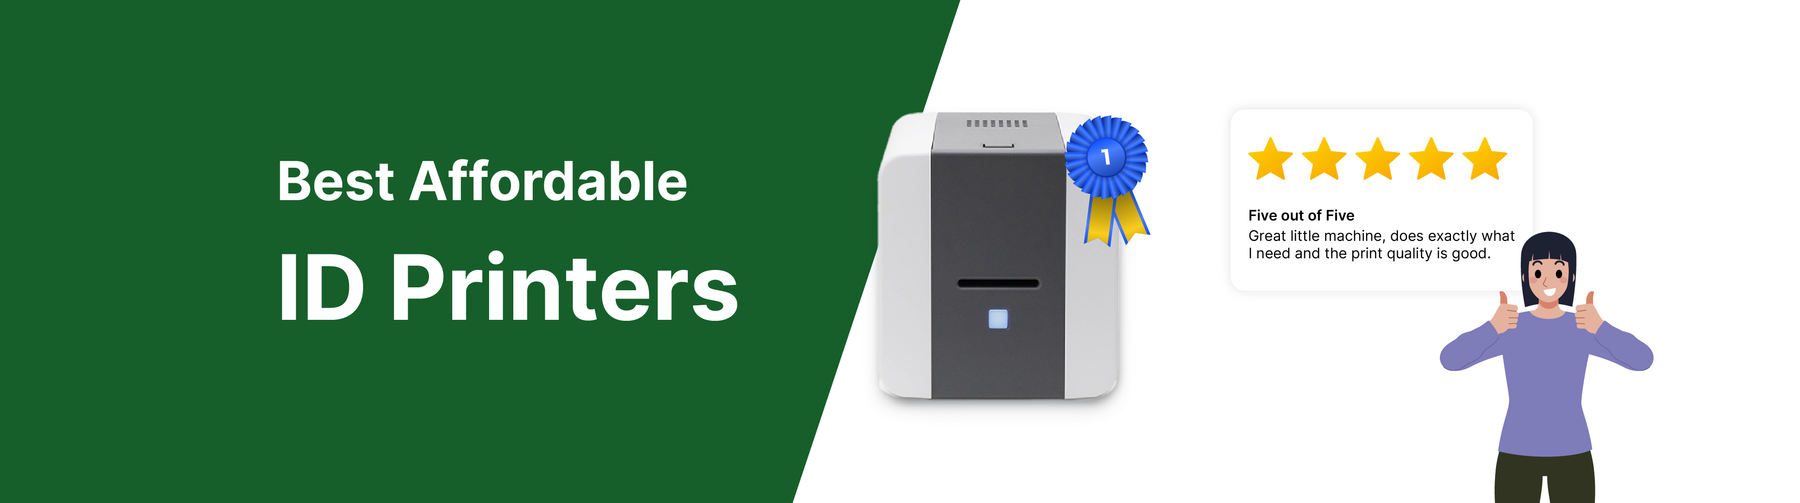 Affordable ID Card Printers for on a budget